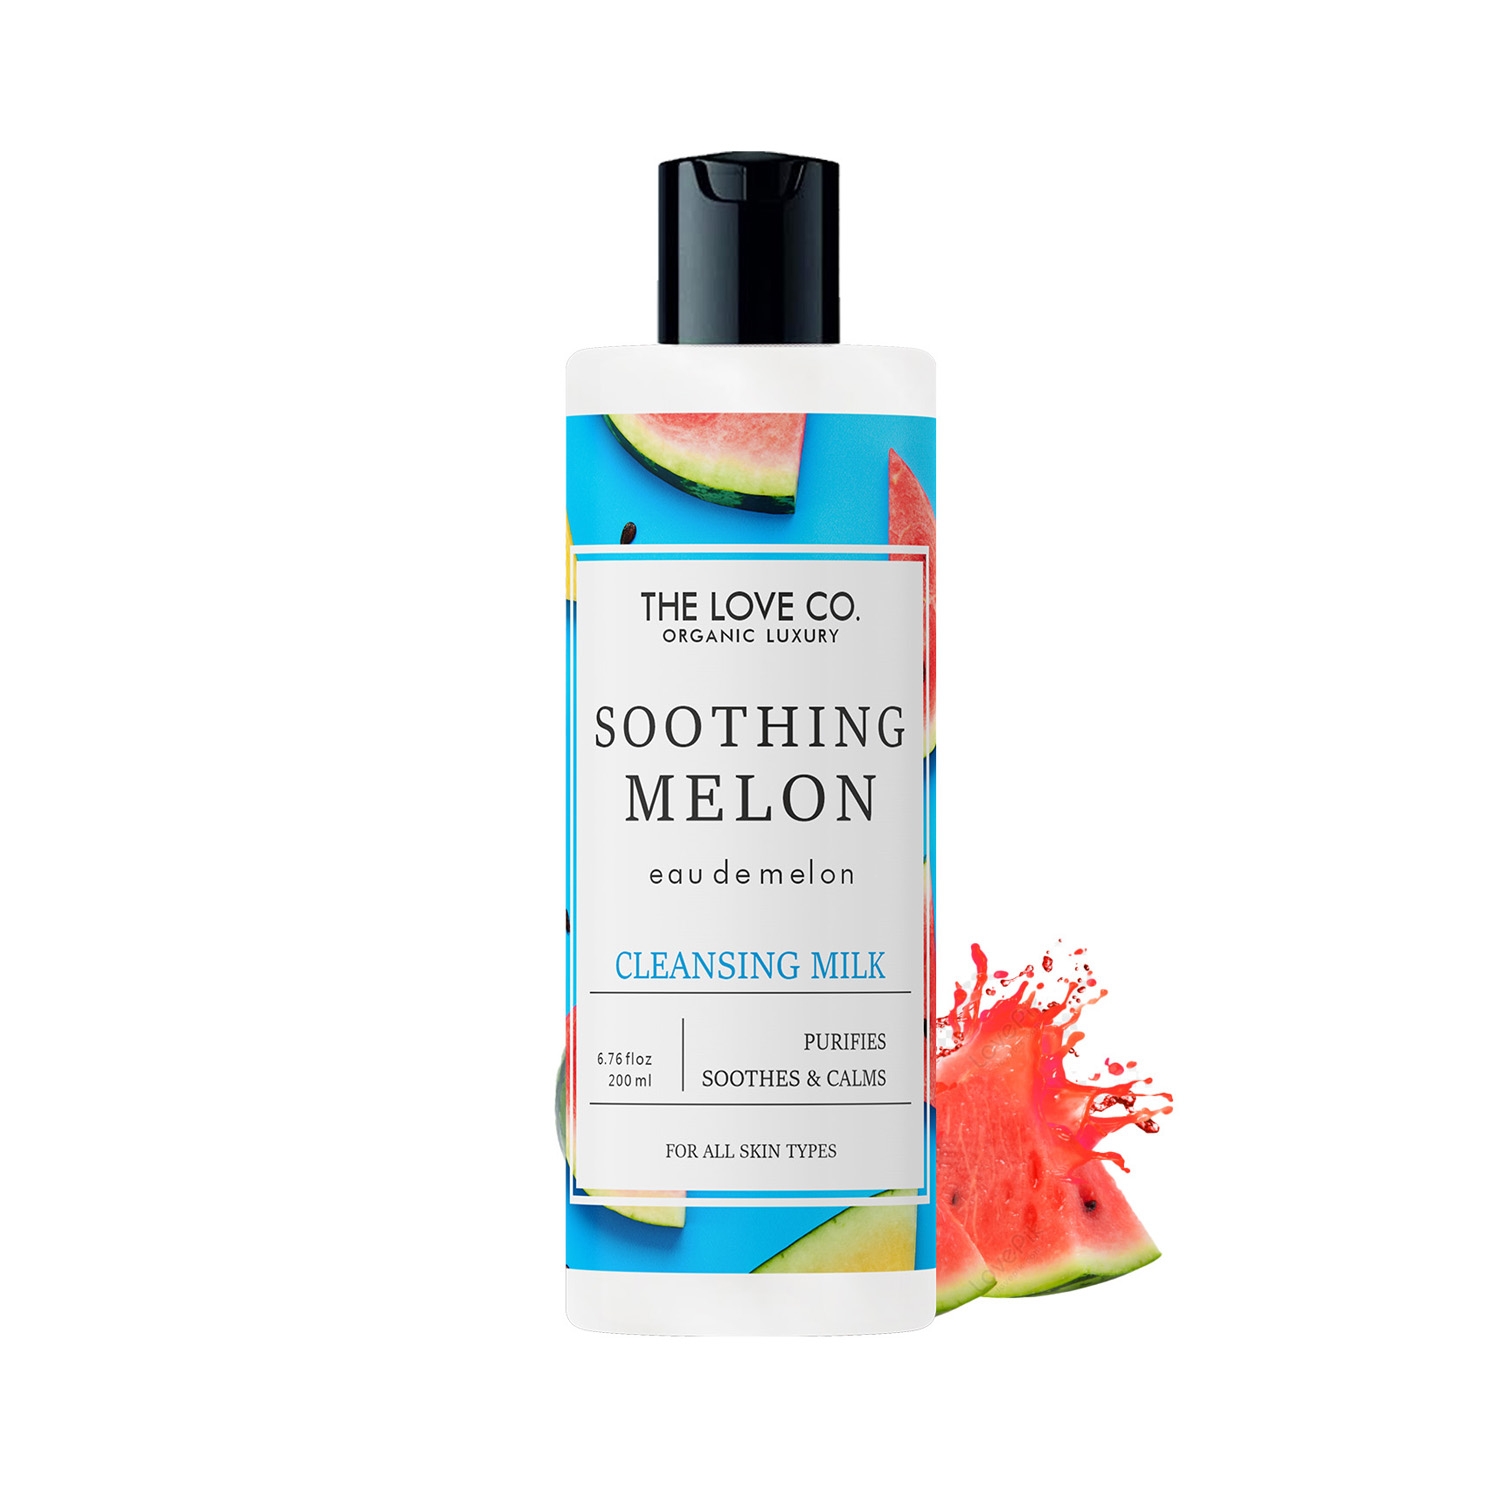 THE LOVE CO. | THE LOVE CO. Soothing Melon Cleansing Milk (200ml)